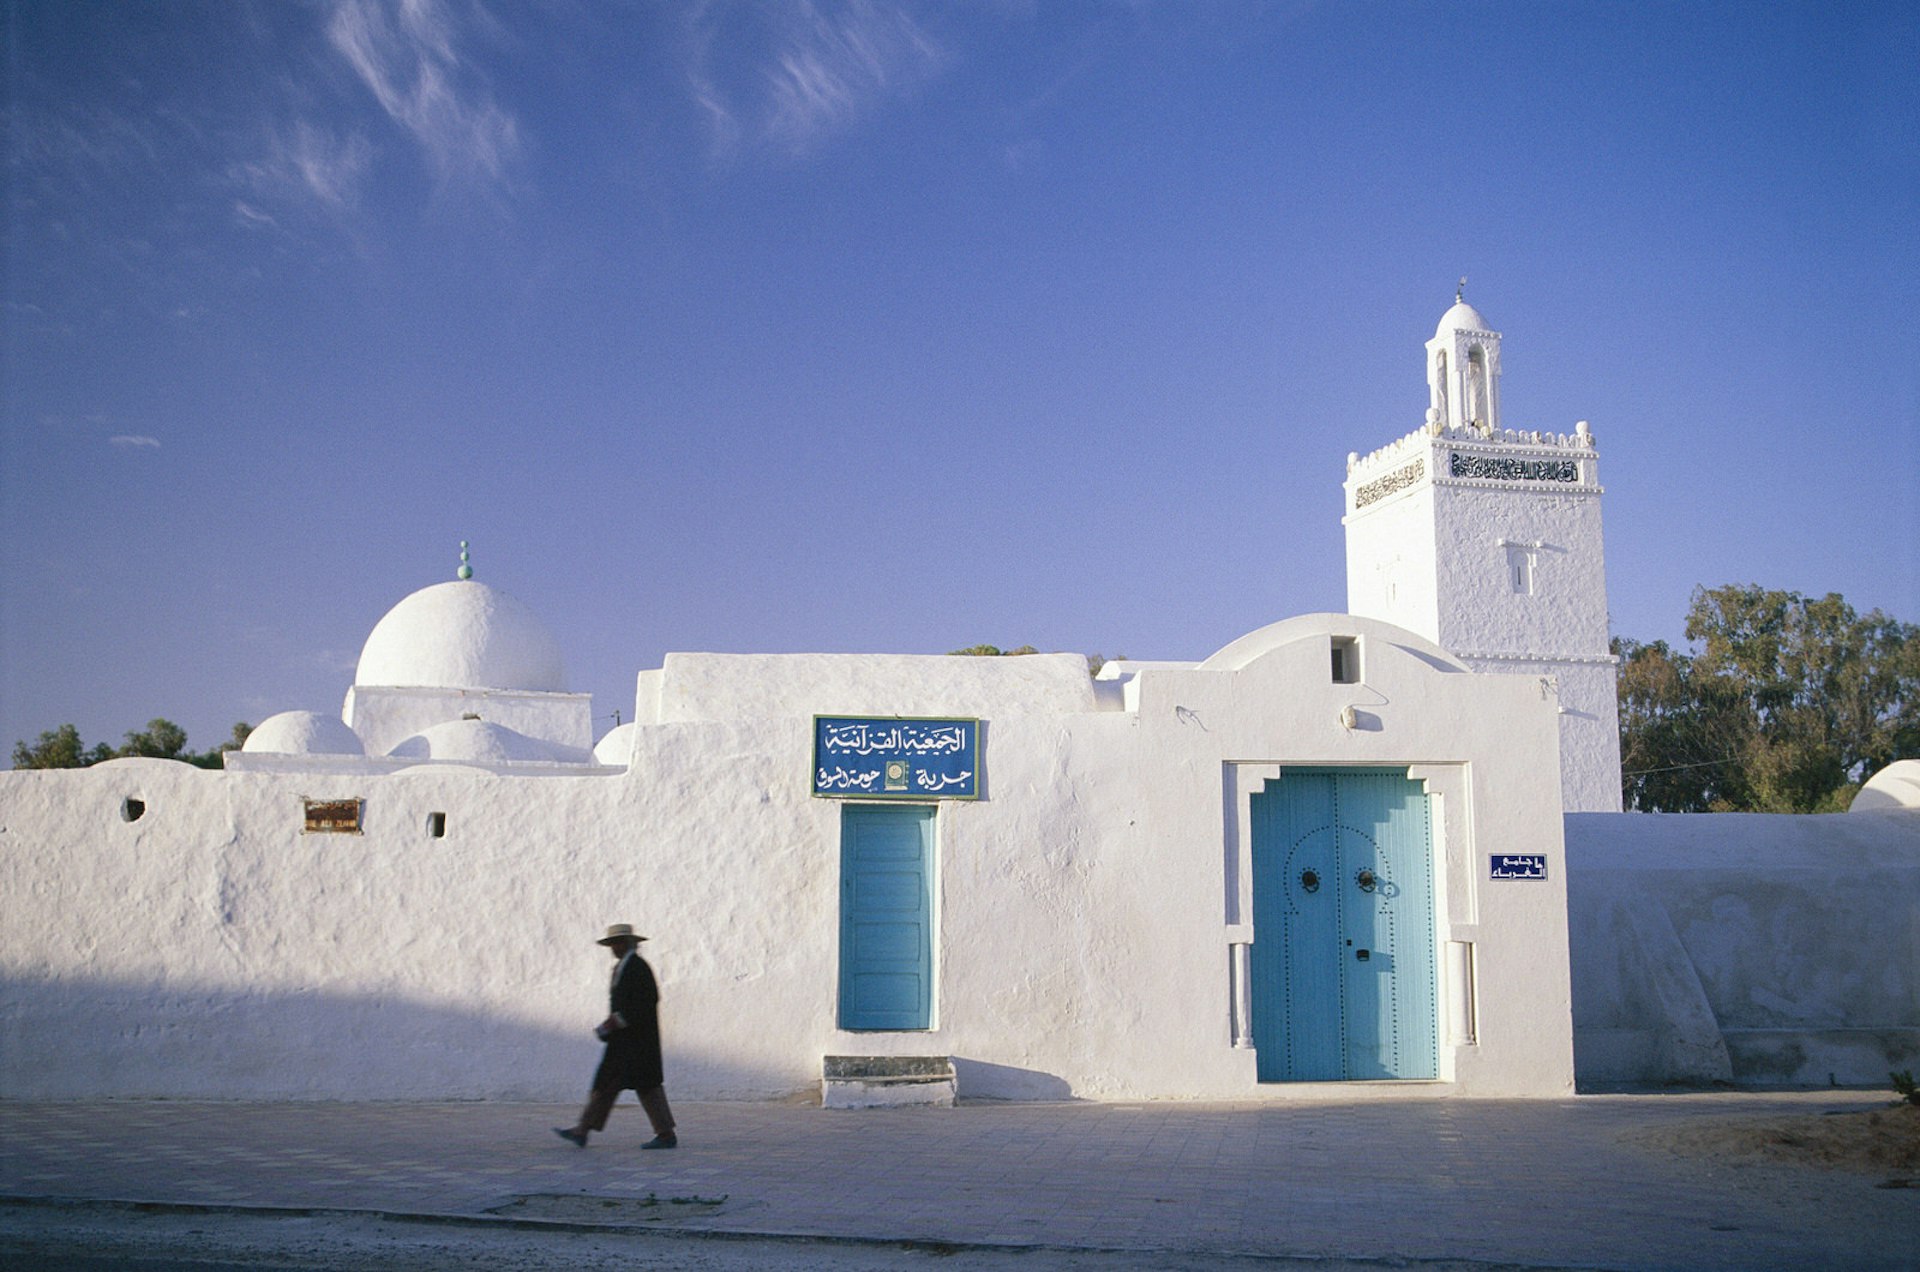 The village of Houmt Souk is a traditional group of one-storey houses with whitewashed walls, and a small mosque with tower. Image by Travel Ink / Getty Images